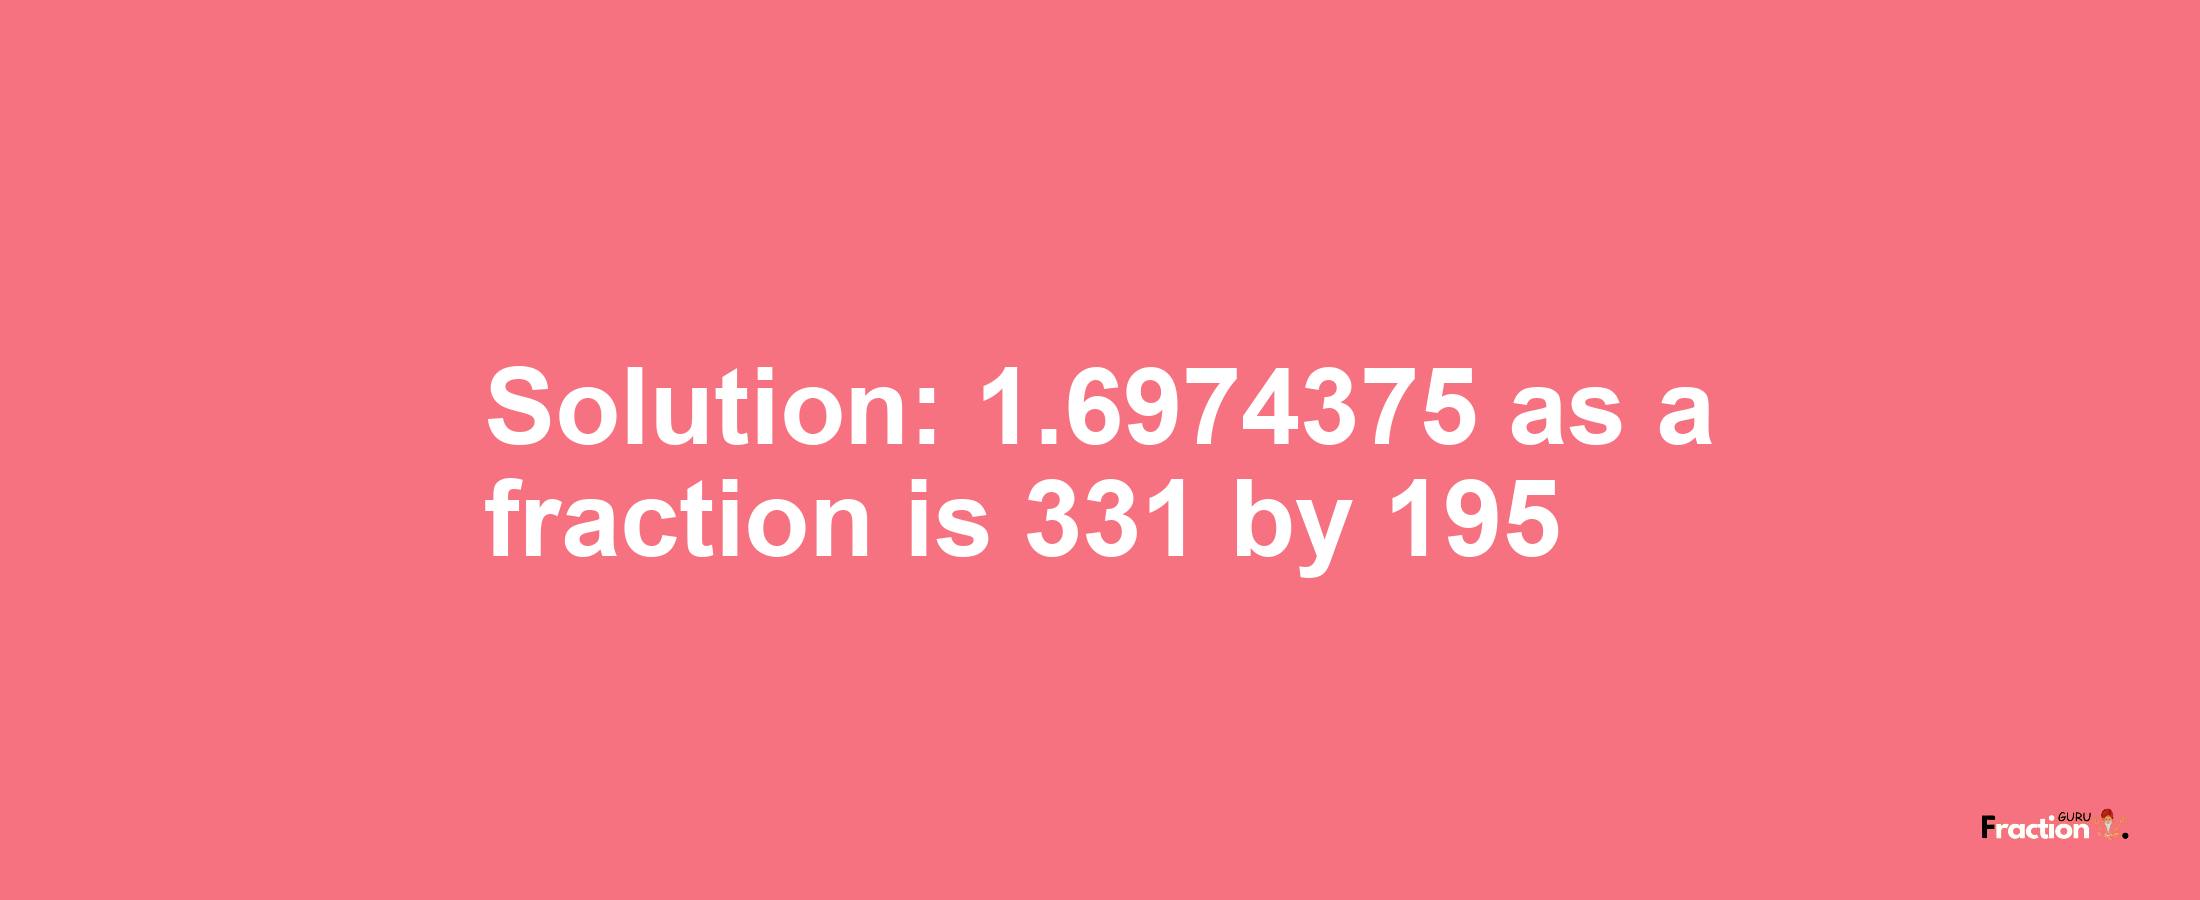 Solution:1.6974375 as a fraction is 331/195